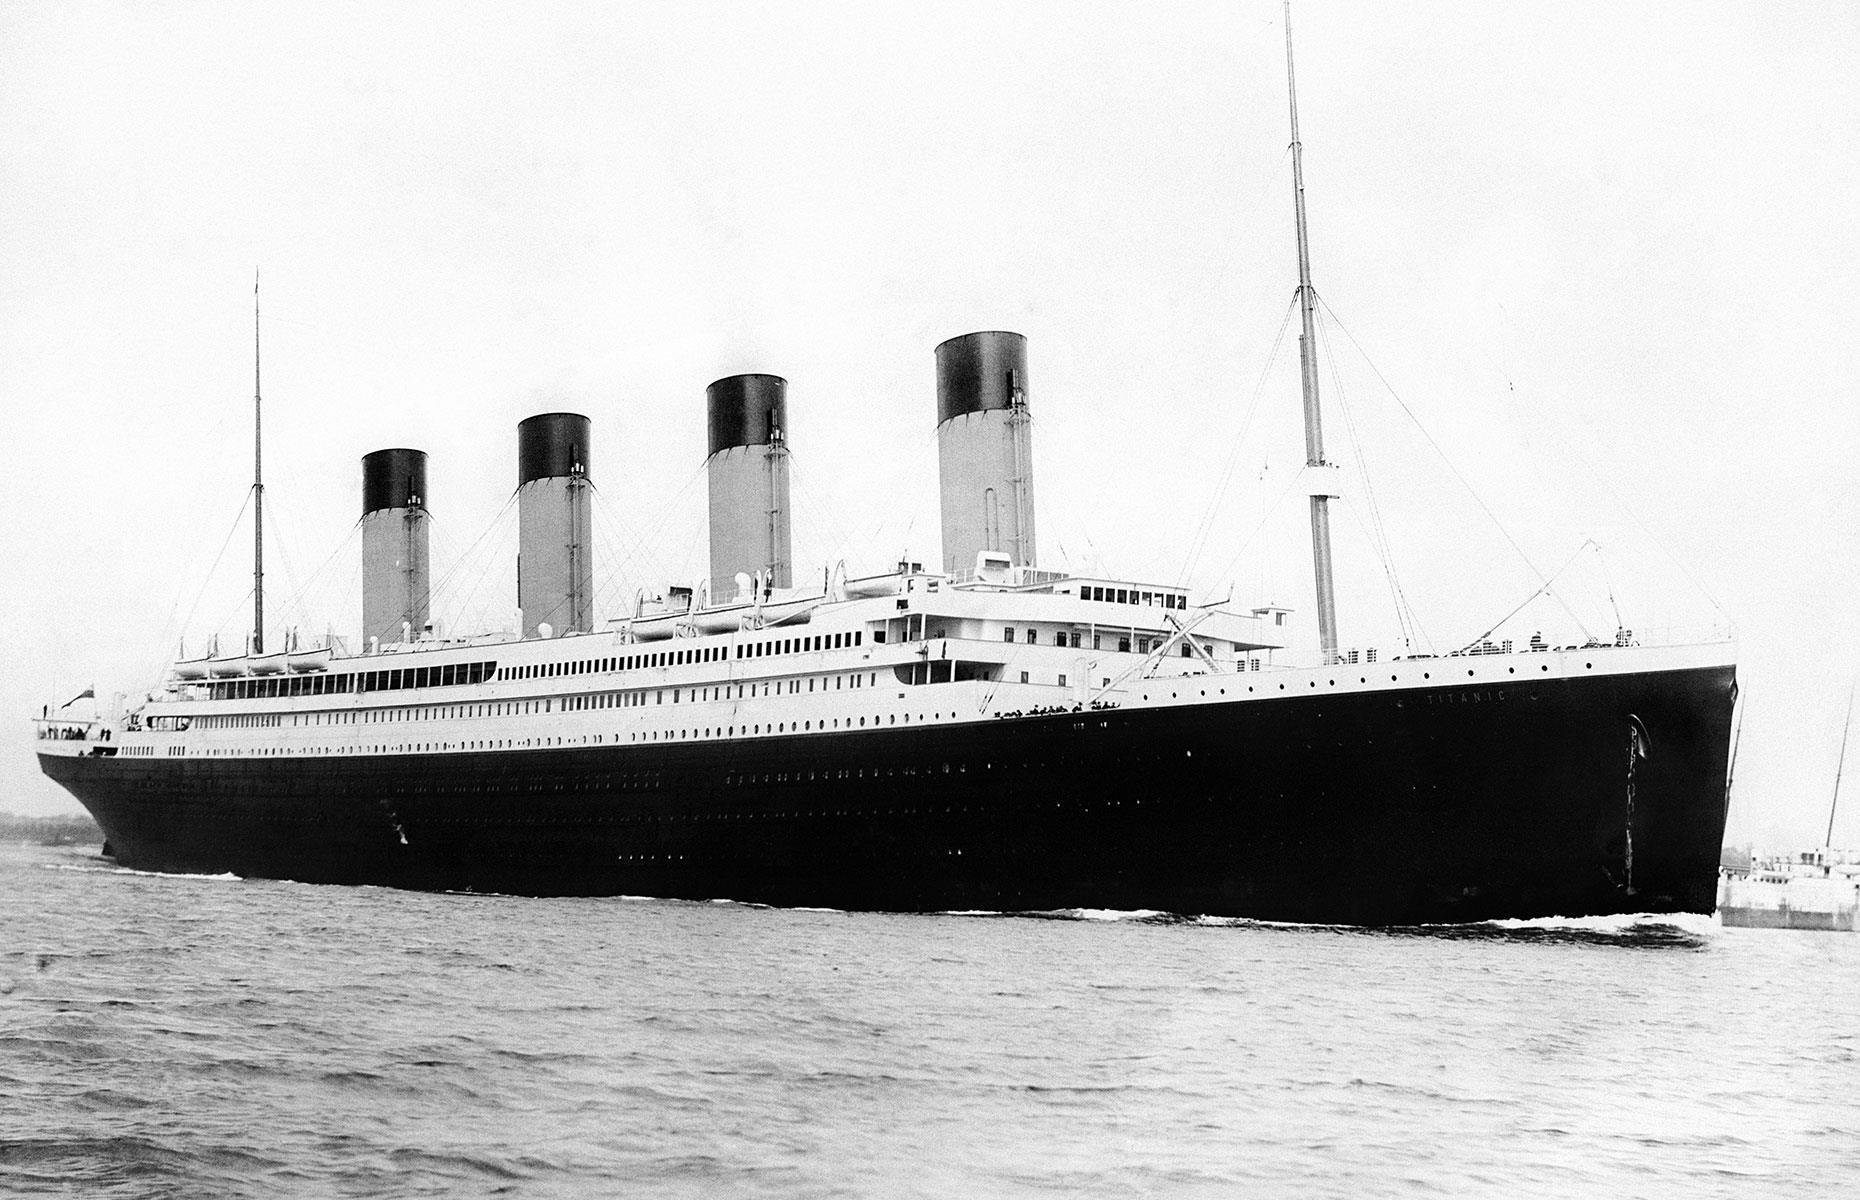 <p>One of the most famous and devastating events in cruise history occurred in this decade. Dubbed "unsinkable" by the White Star Line's vice-president, the Titanic set out from Southampton on her maiden voyage on 10 April 1912 to much applause. But just four days later, she collided with an iceberg in the North Atlantic: the compartments in her hull filled with water and she tragically sank. The disaster claimed the lives of more than 1,500 people. <a href="https://www.loveexploring.com/gallerylist/72633/secrets-of-the-titanic-life-onboard-the-worlds-most-famous-ship">Now discover the secrets of life onboard the Titanic</a>.</p>